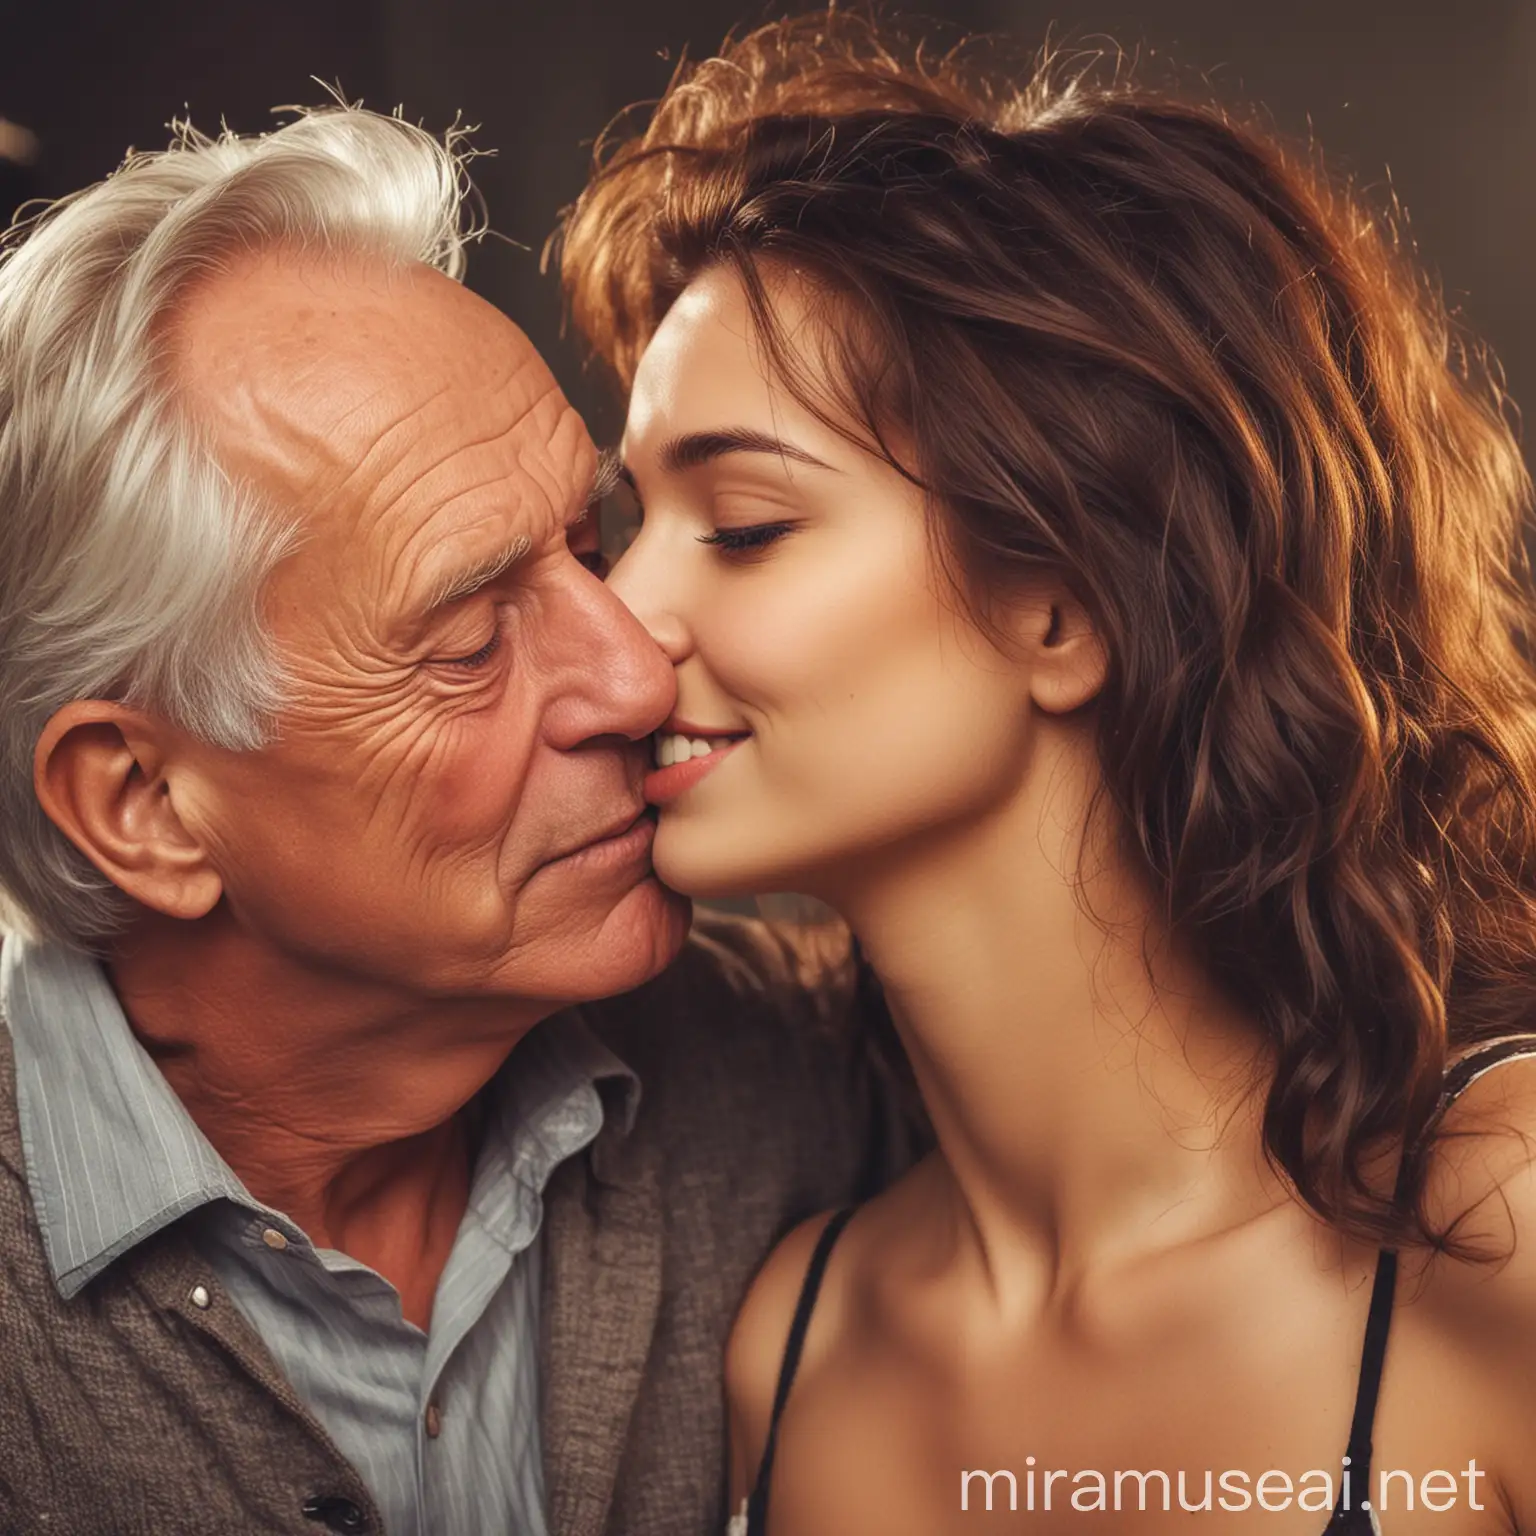 Romantic Relationship Young Women Falling in Love with Older Man